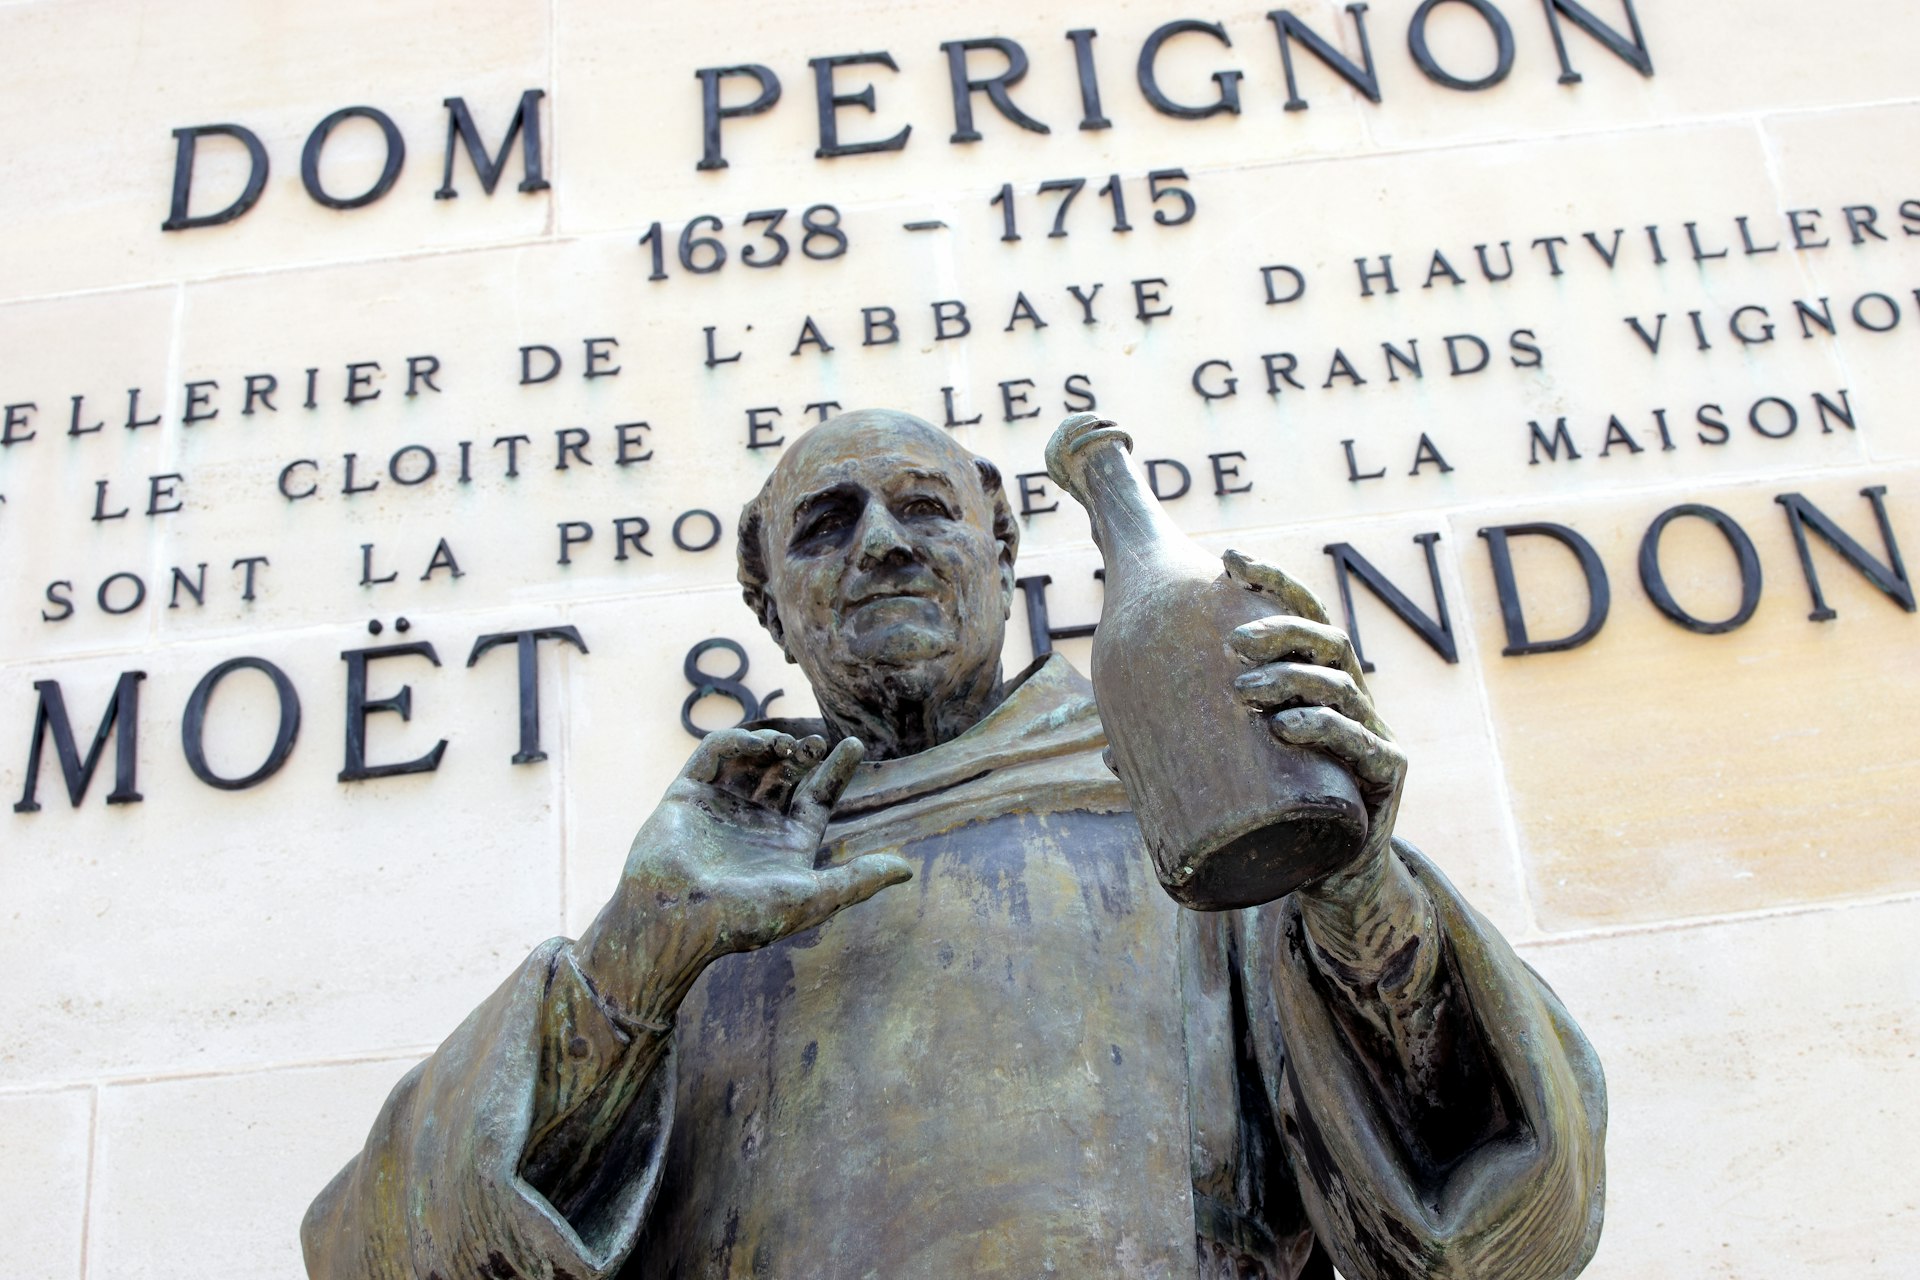 Close up of statue of Dom Perignon at Champagne house Moet & Chandon